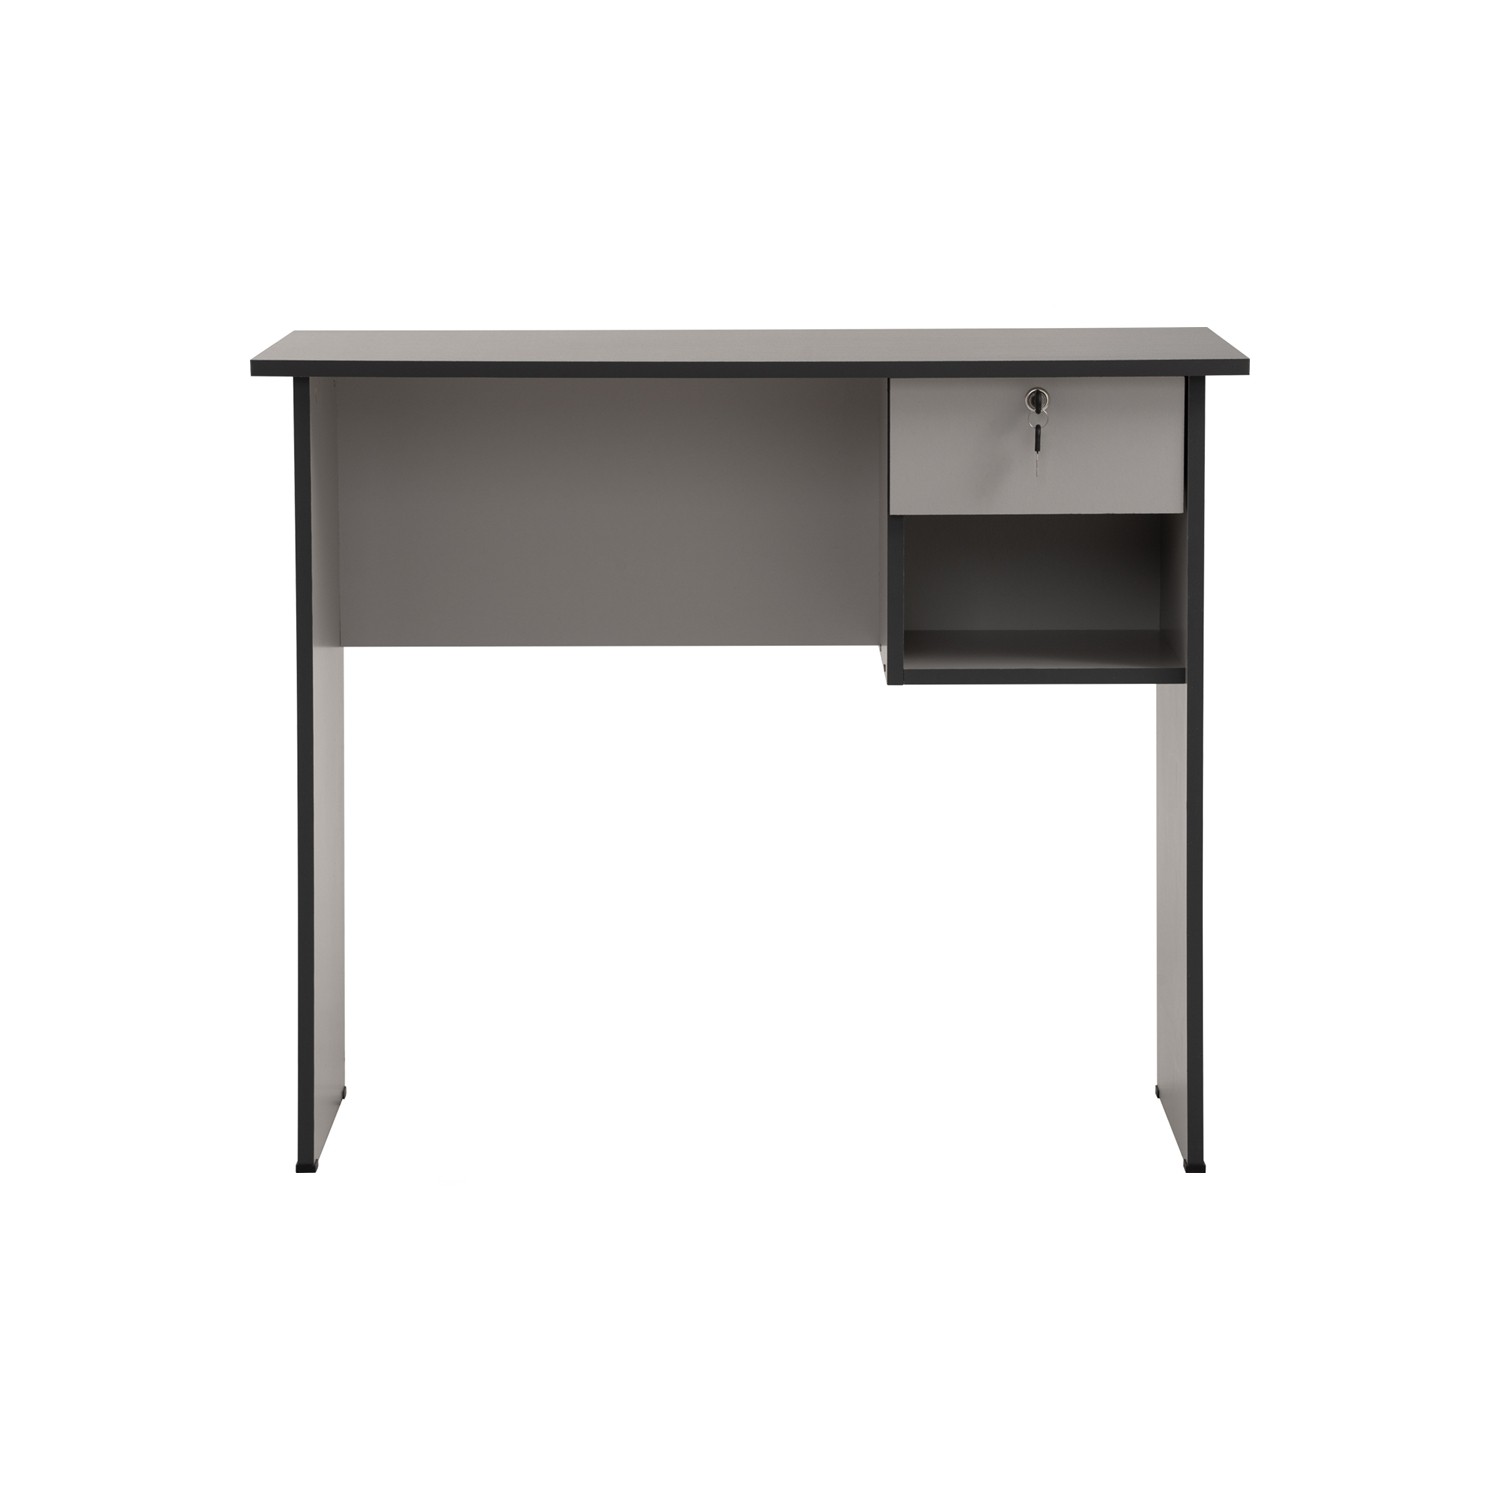 ECO 3' OFFICE TABLE GREY